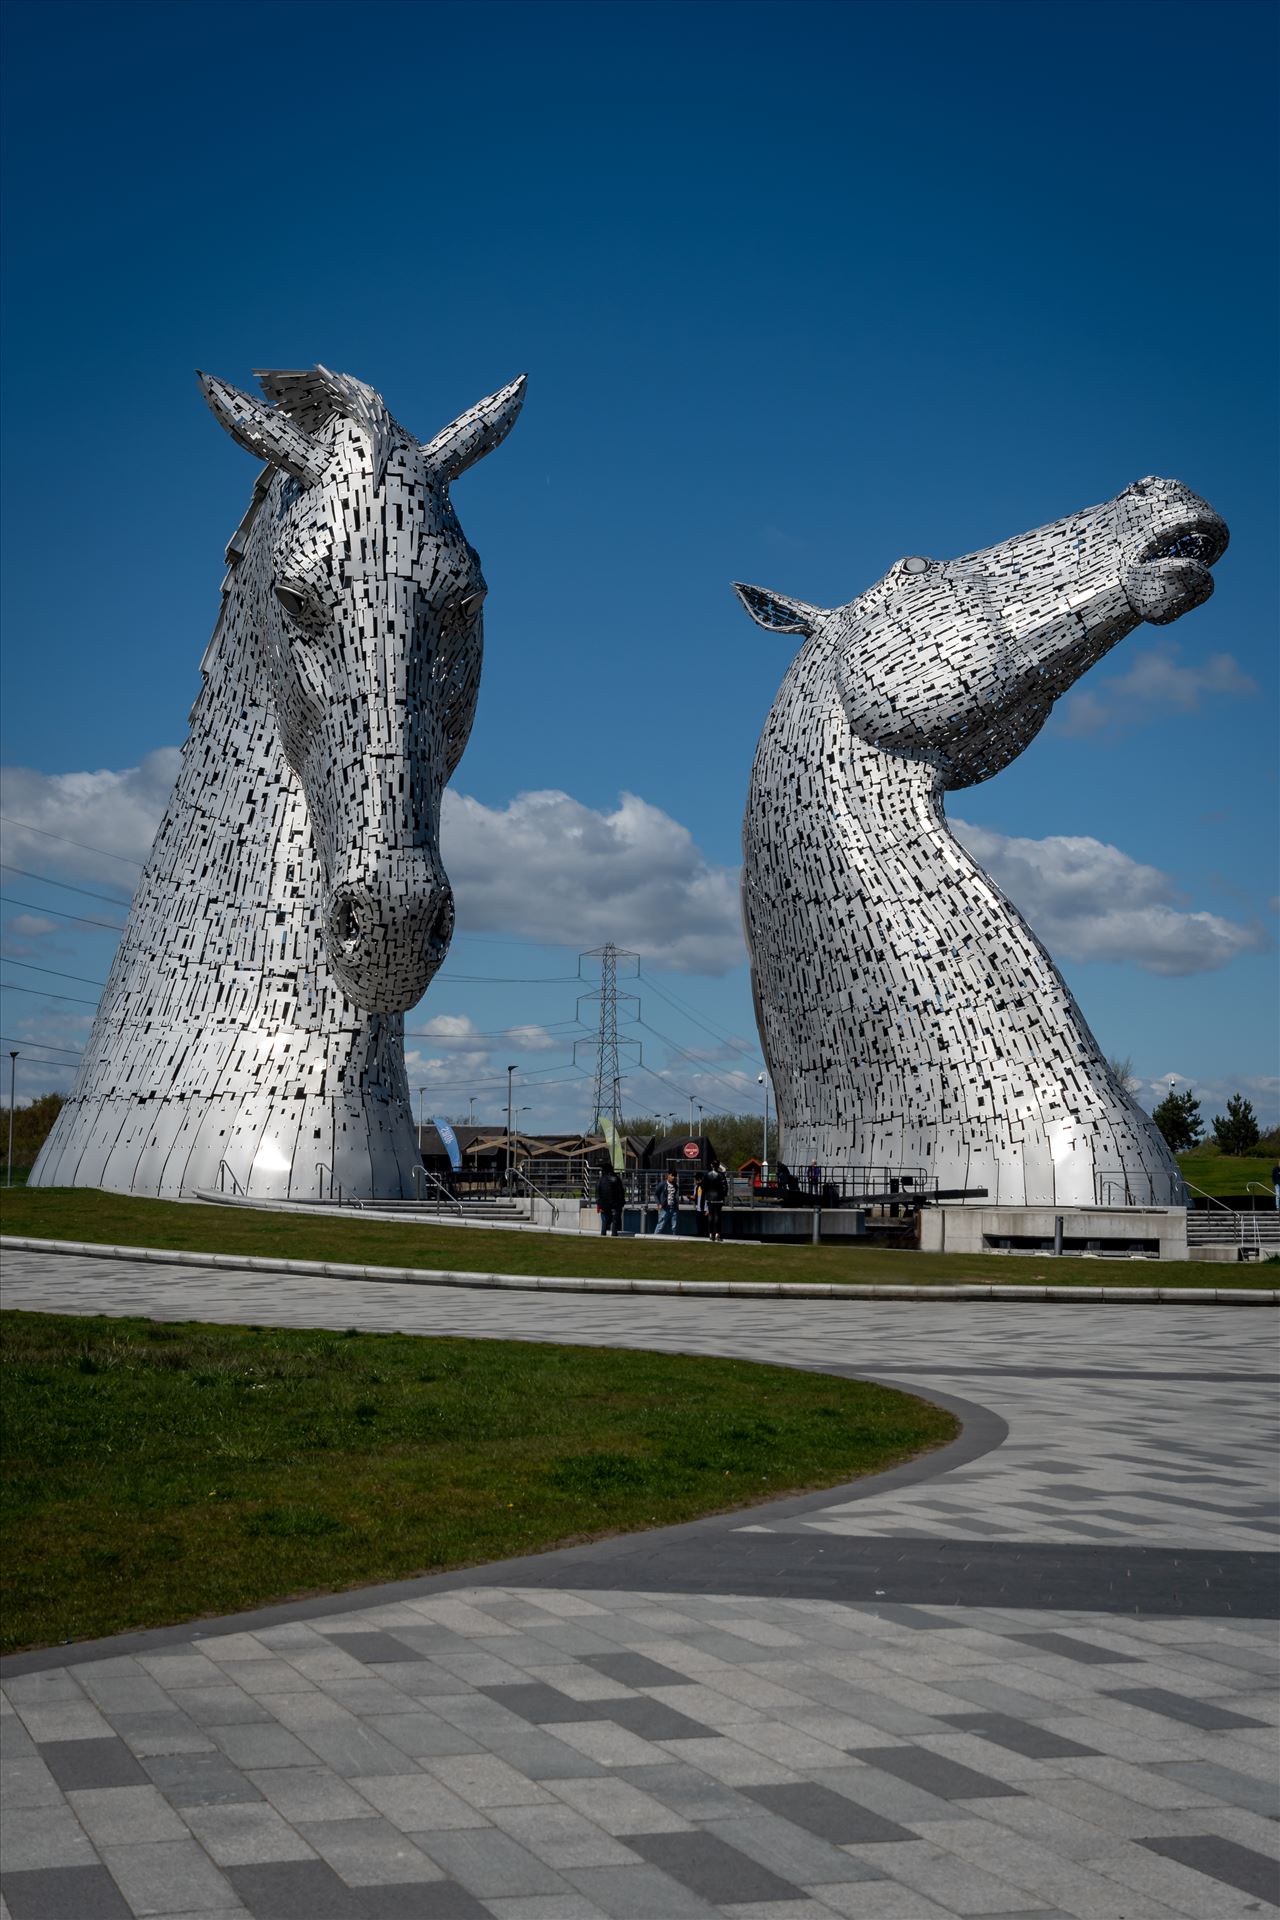 'The Kelpies', Falkirk, ScotlandBuilt of structural steel with a stainless steel cladding, The Kelpies are 30 metres high and weigh 300 tonnes each. Construction began in June 2013, and was complete by October 2013.